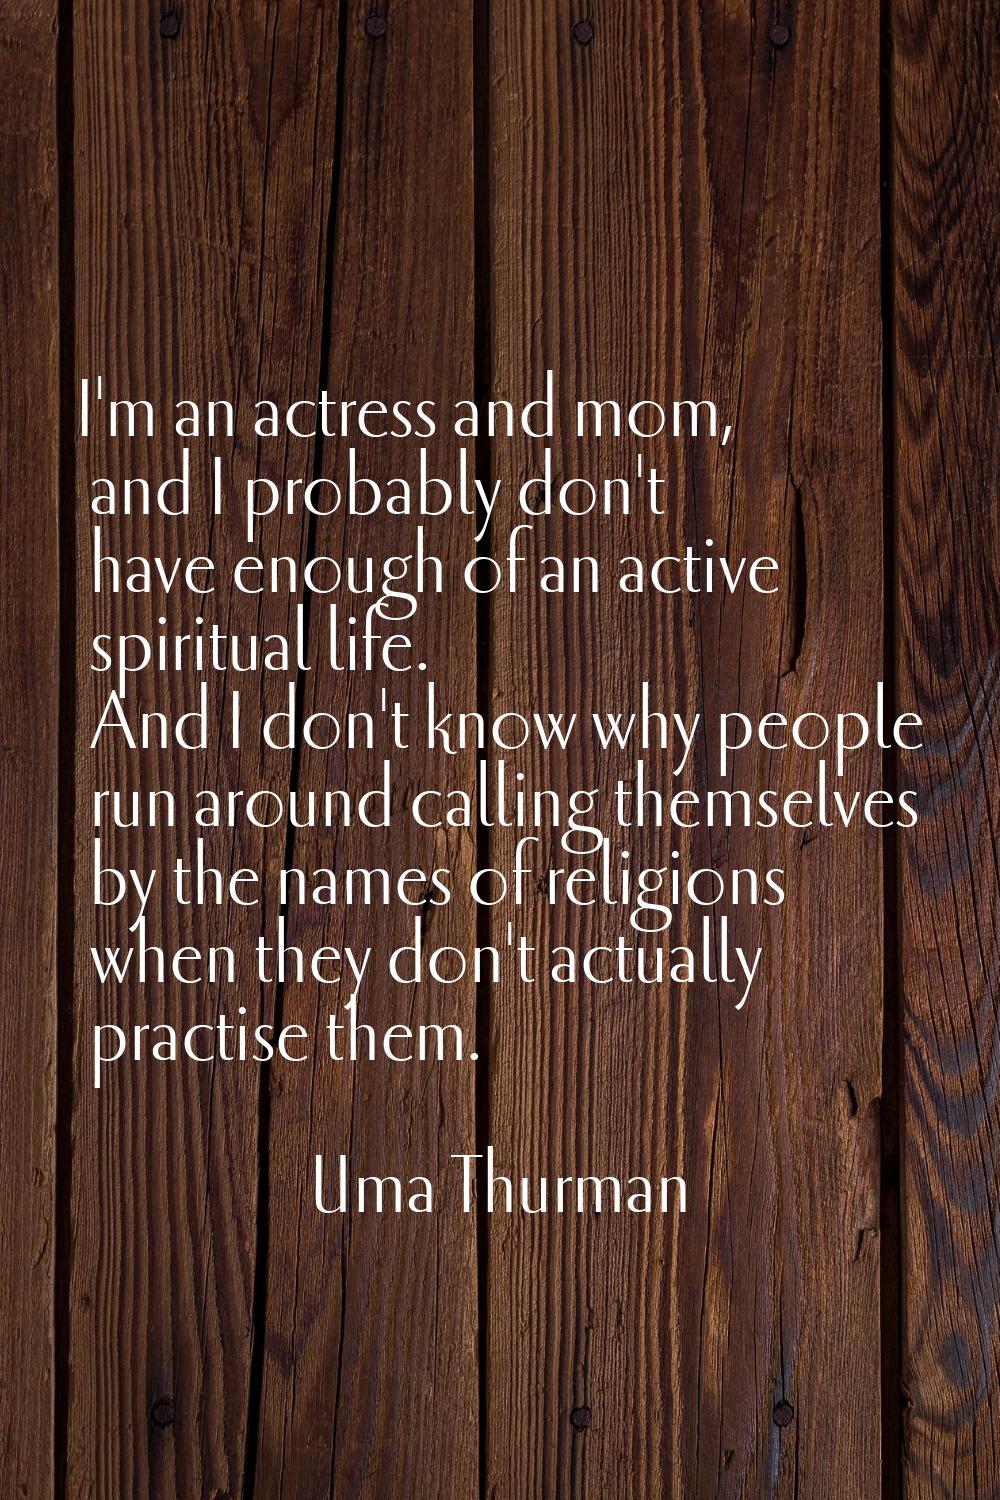 I'm an actress and mom, and I probably don't have enough of an active spiritual life. And I don't k